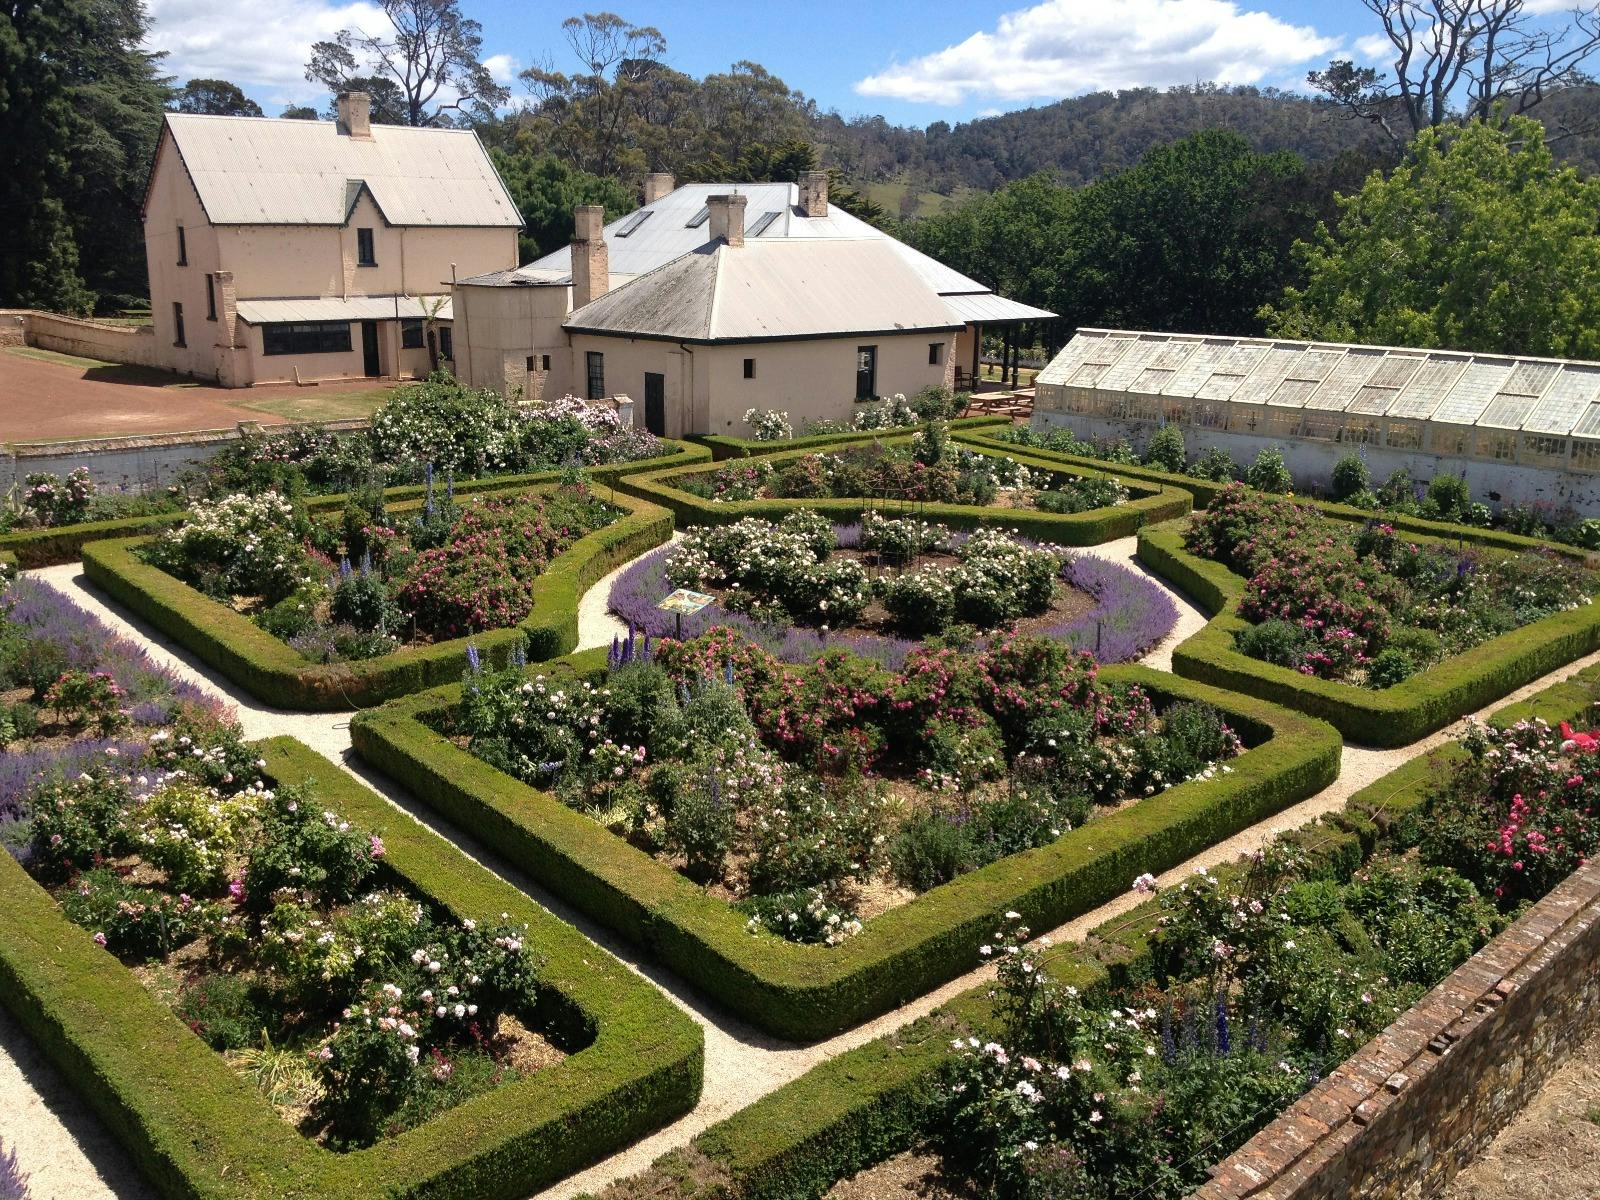 Large walled garden with neatly maintained hedges and various rosebushes